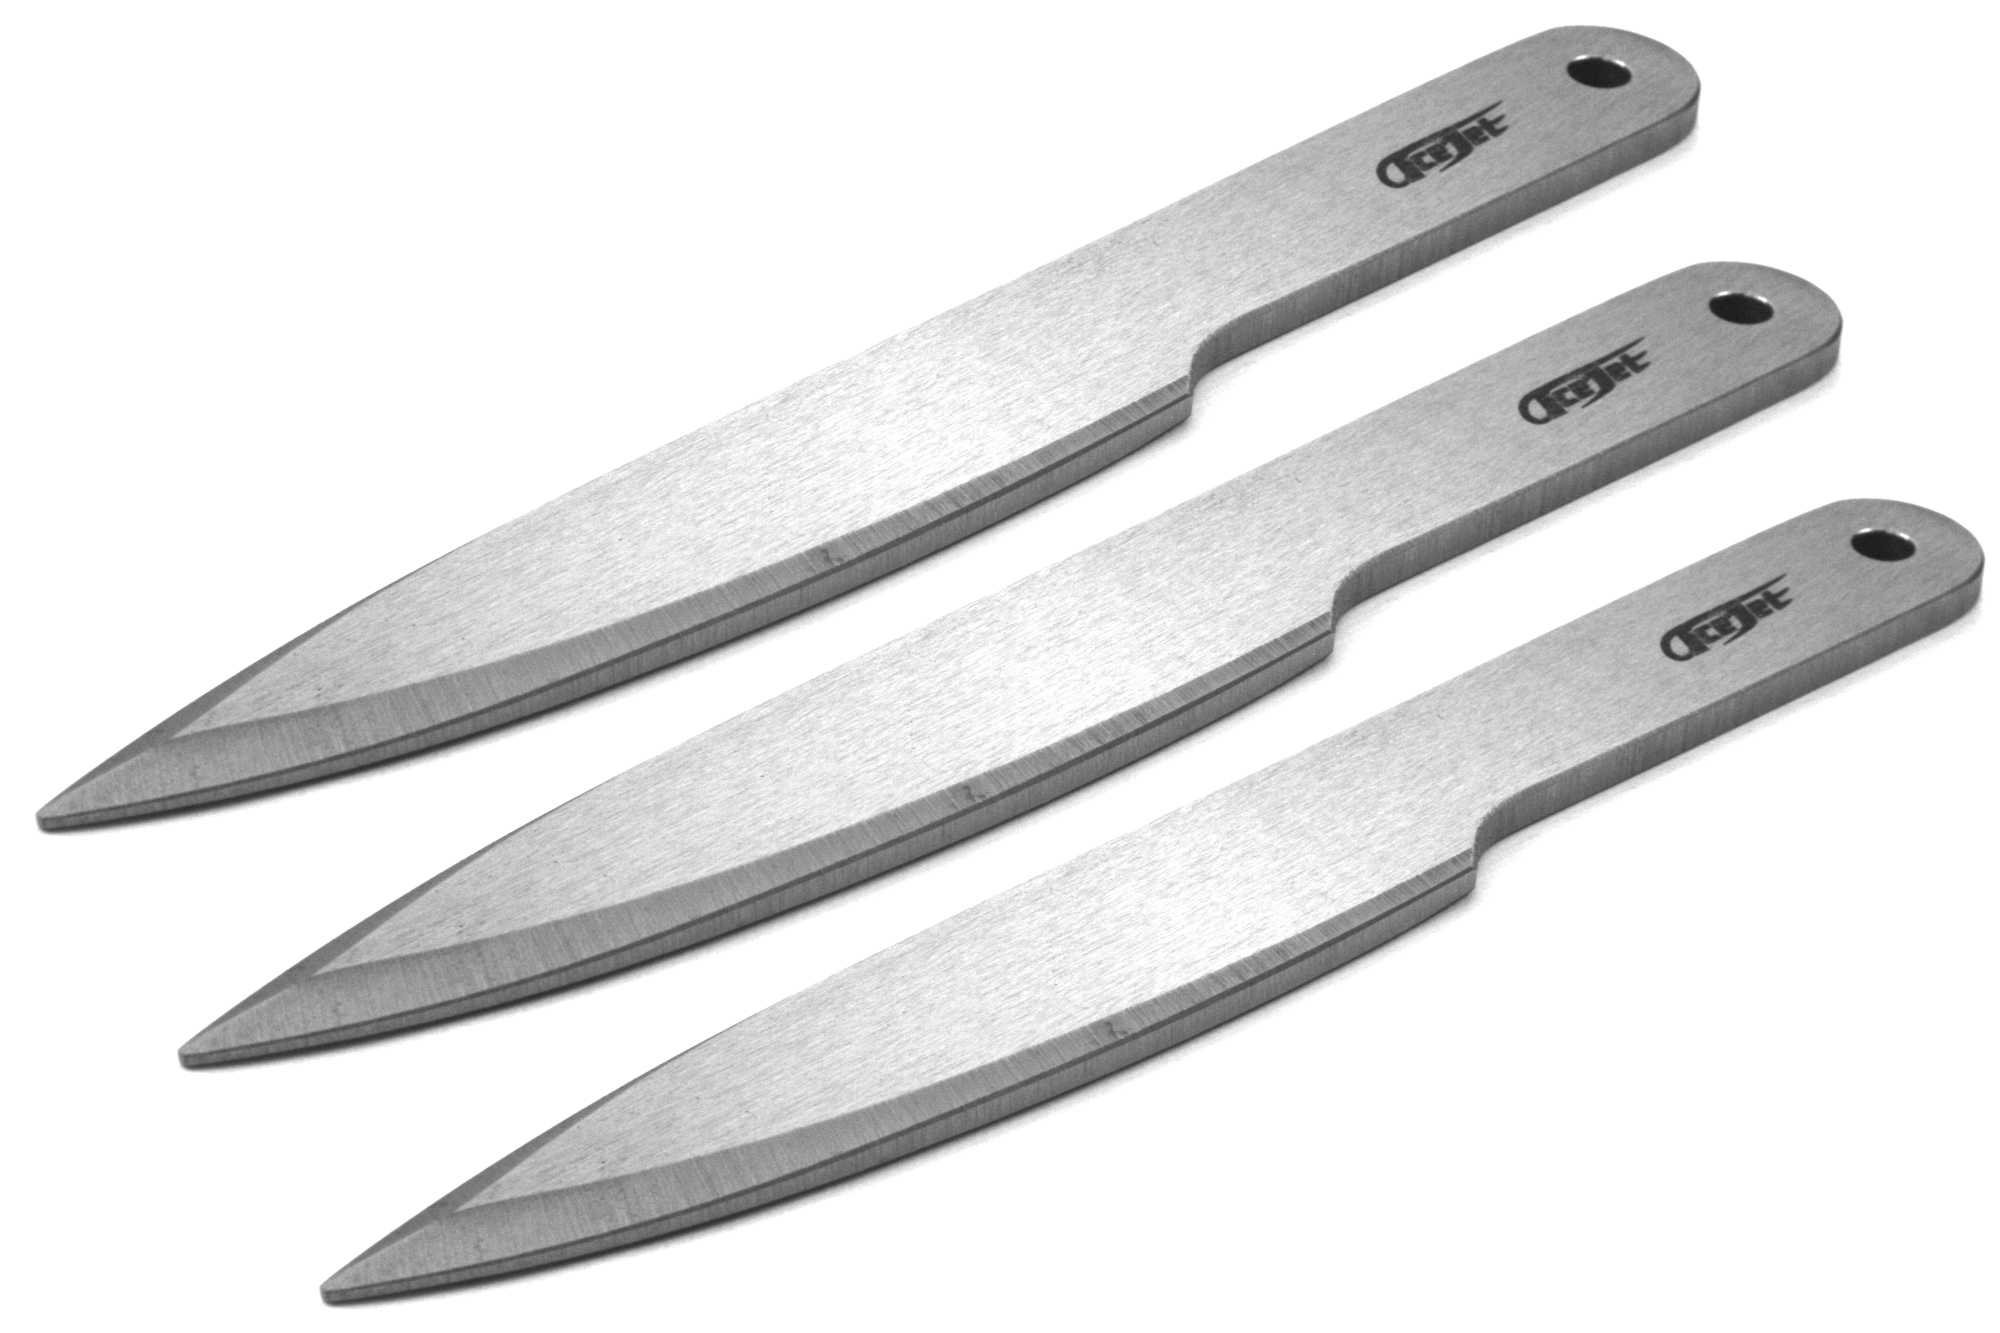 ACEJET APPACHE D2 - 10" Throwing knife - set of 3